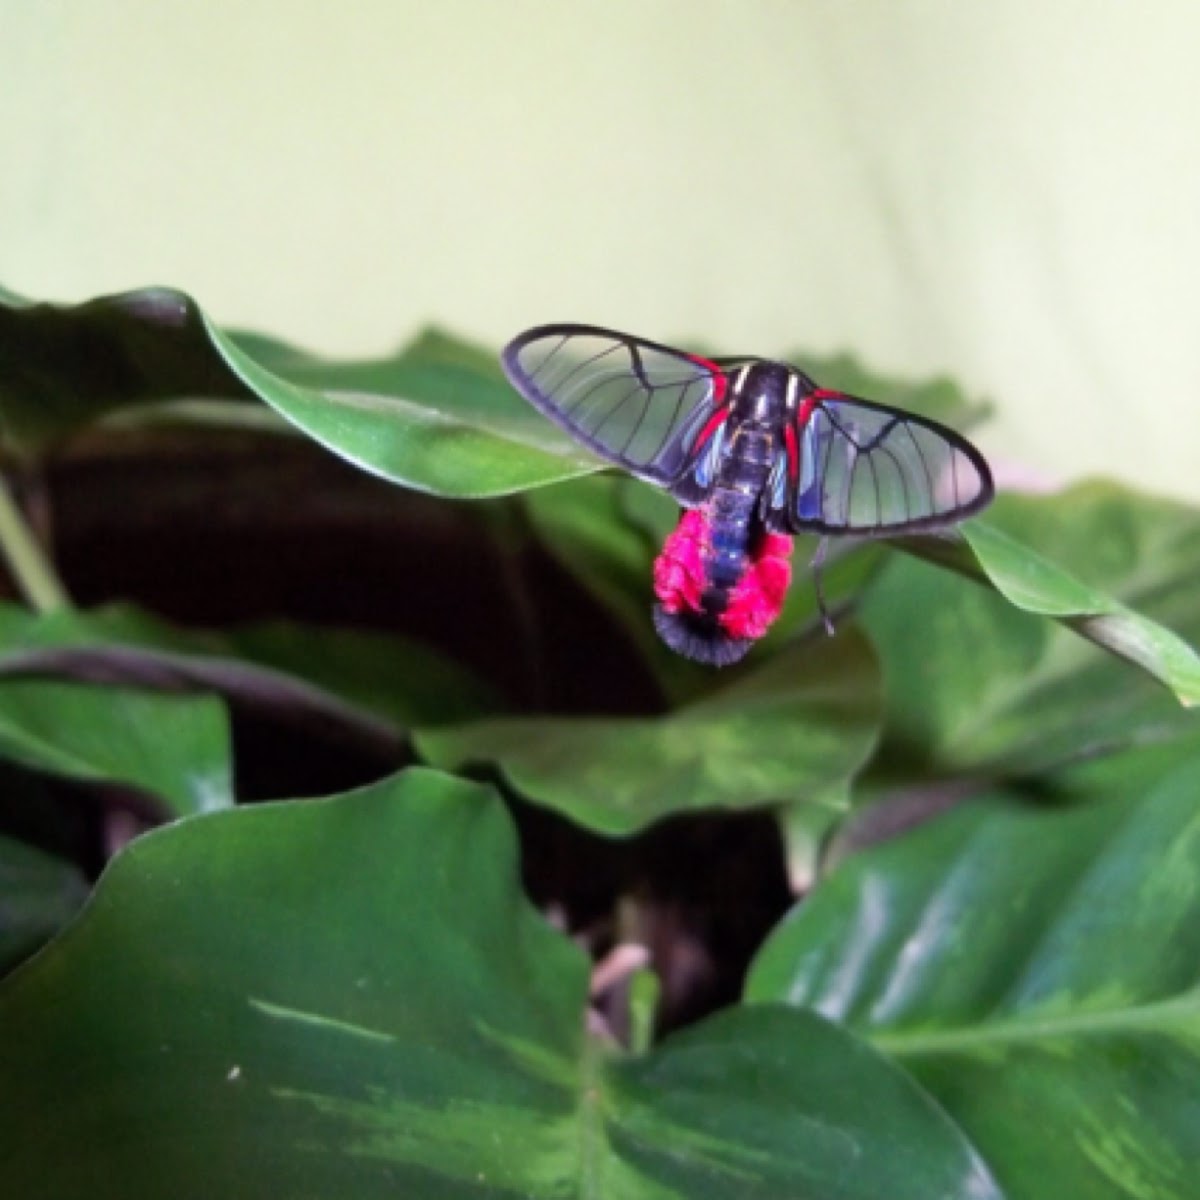 Scarlet-tipped Wasp Mimic -Clear-wing Moth